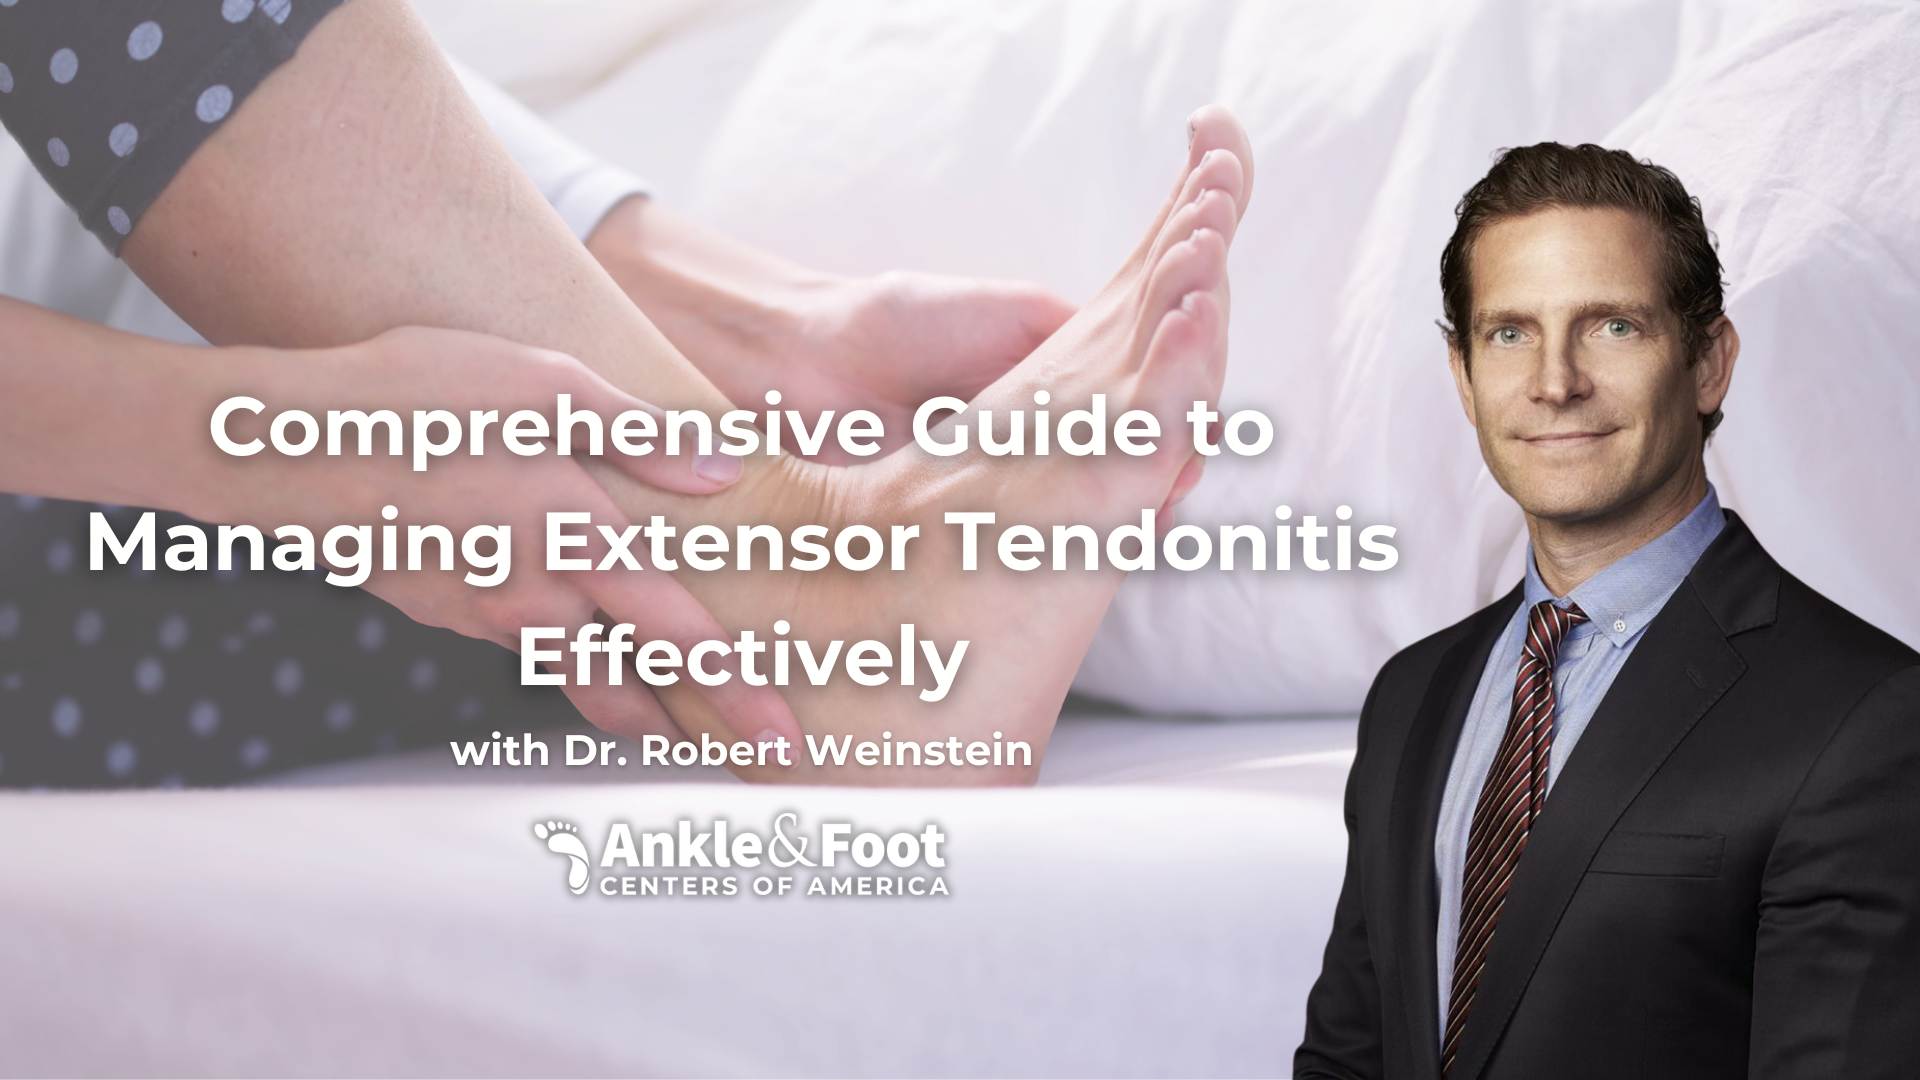 Your Guide to Managing Extensor Tendonitis Effectively